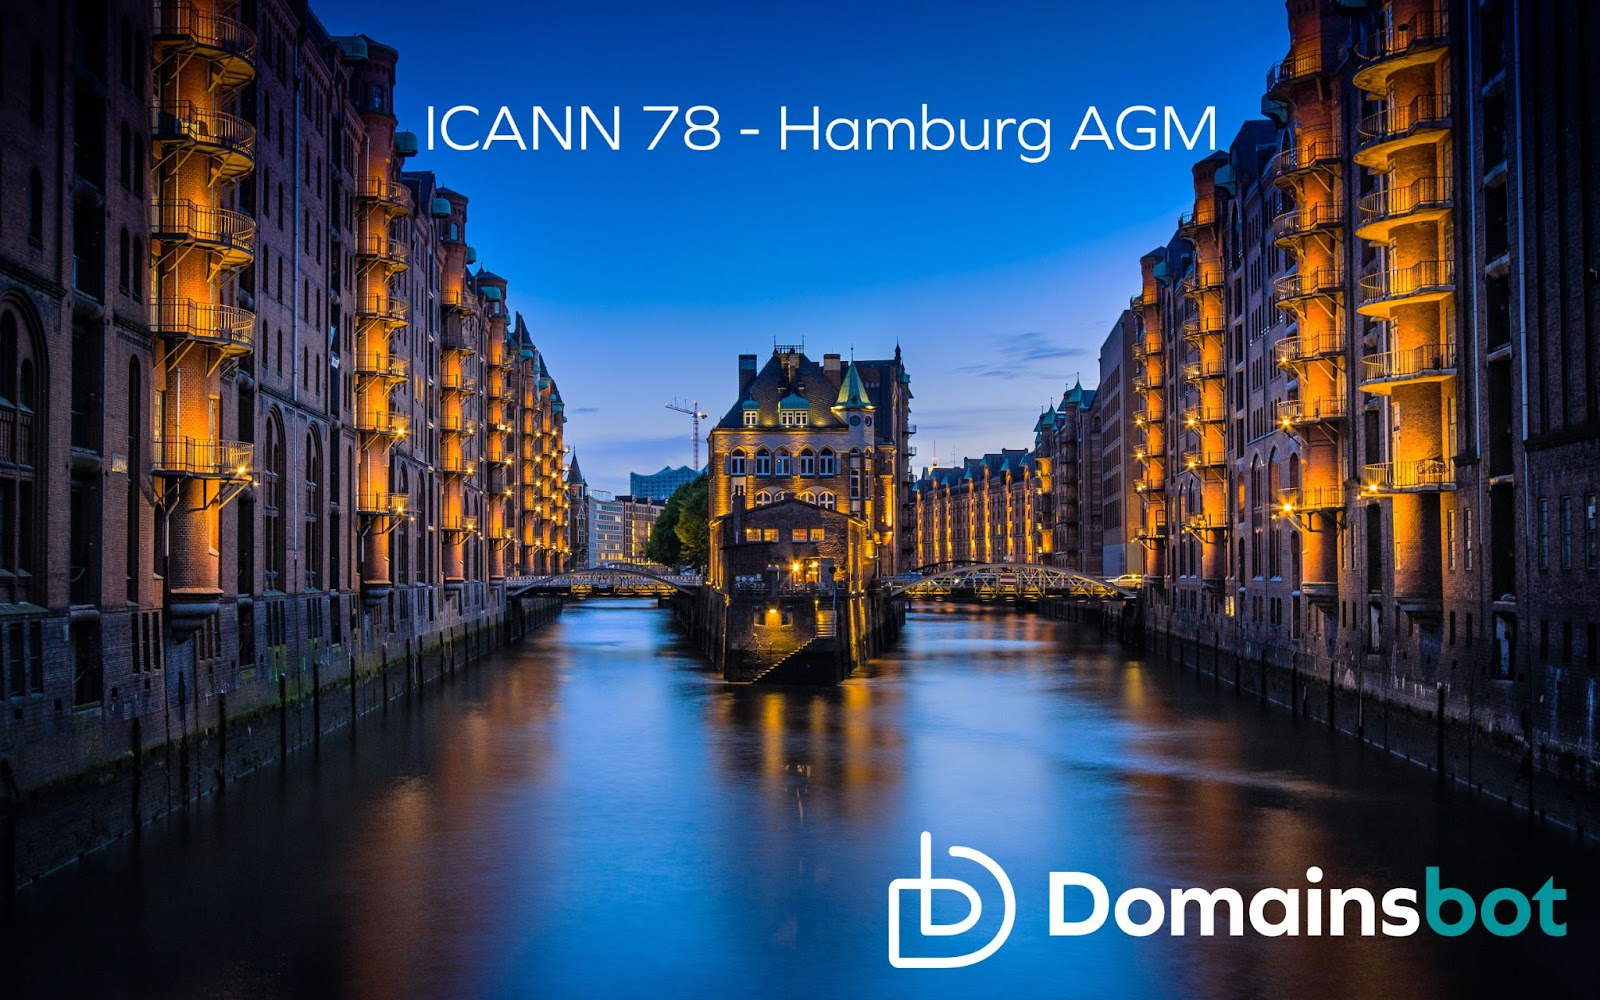 Photograph of Hamburg, Germany where ICANN 78 takes place in October 2023. Includes ICANN 78 0 Hamburg AGM title, and Domainsbot logo